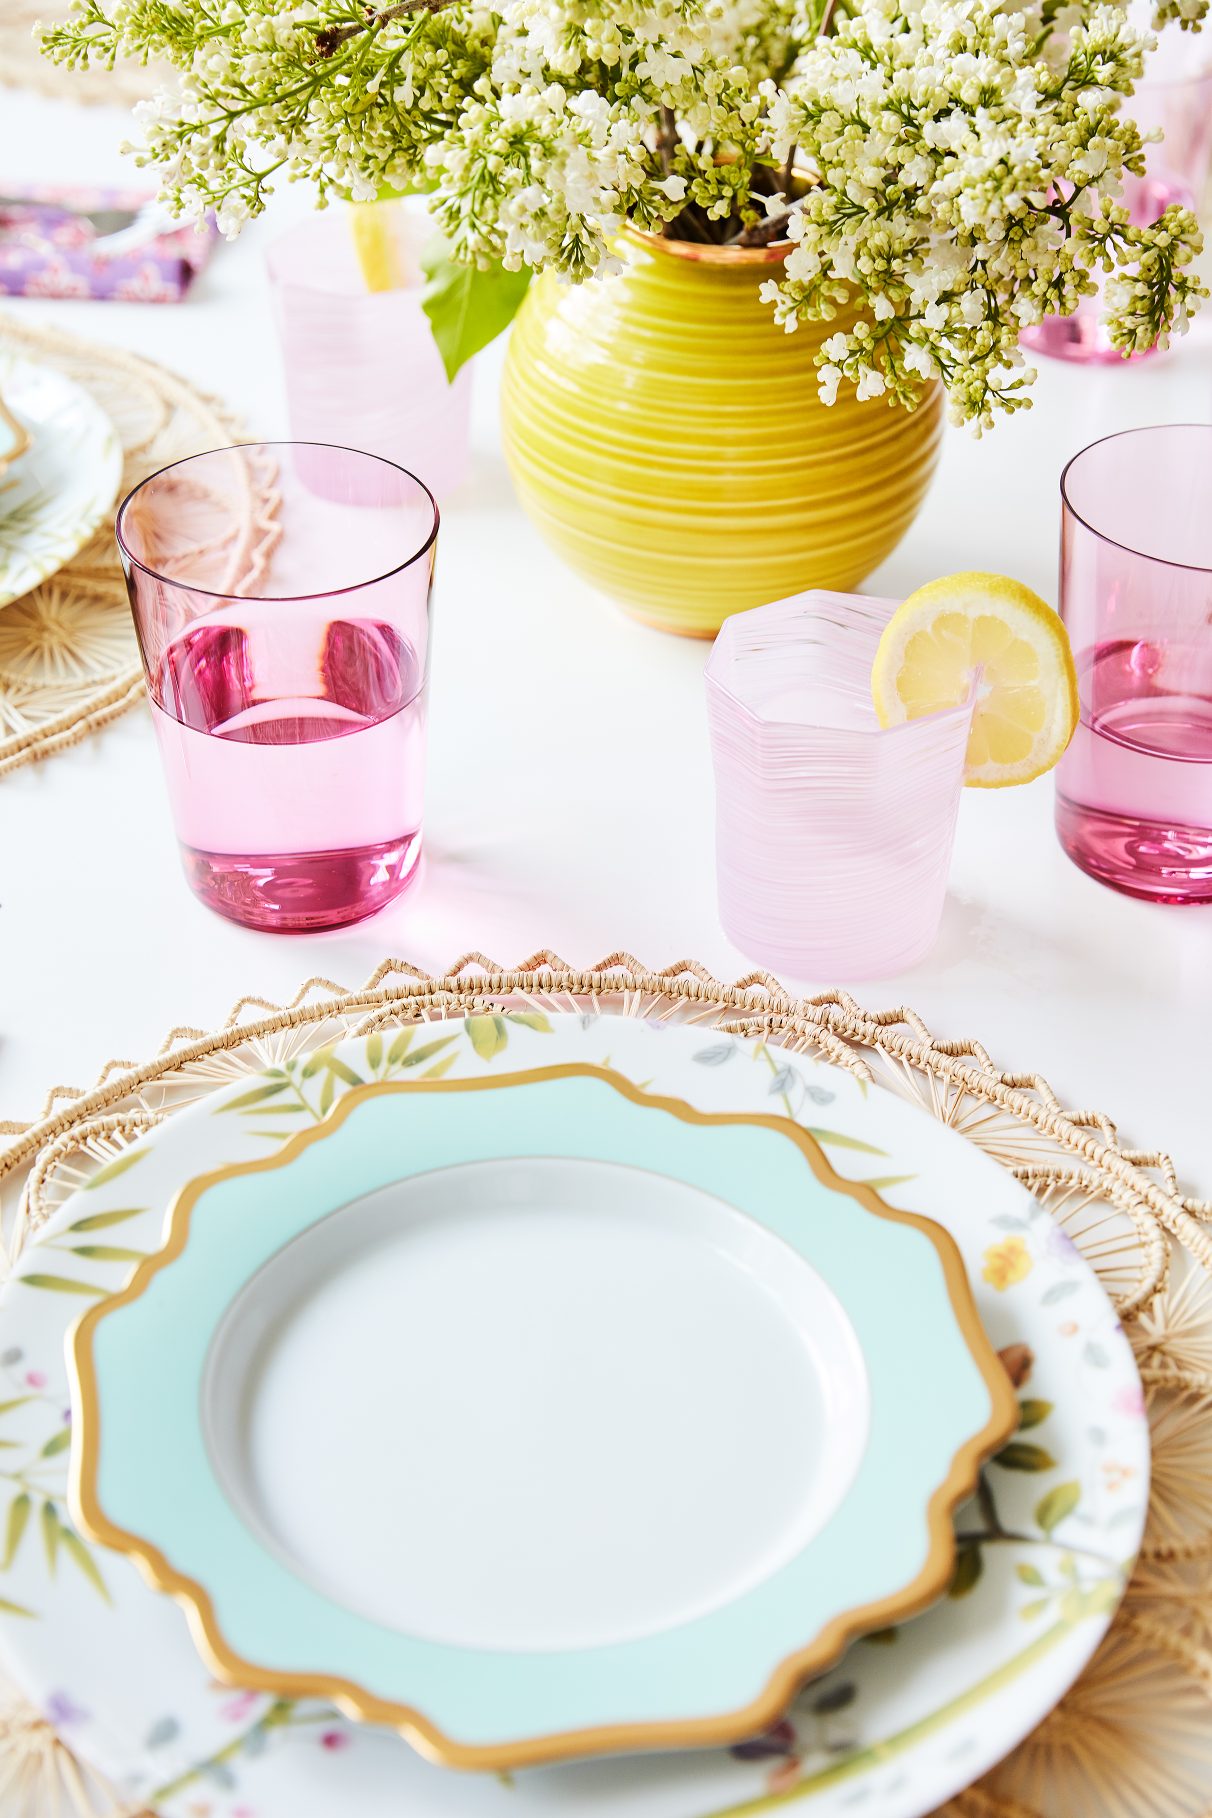 Lagniappe Project: Table setting